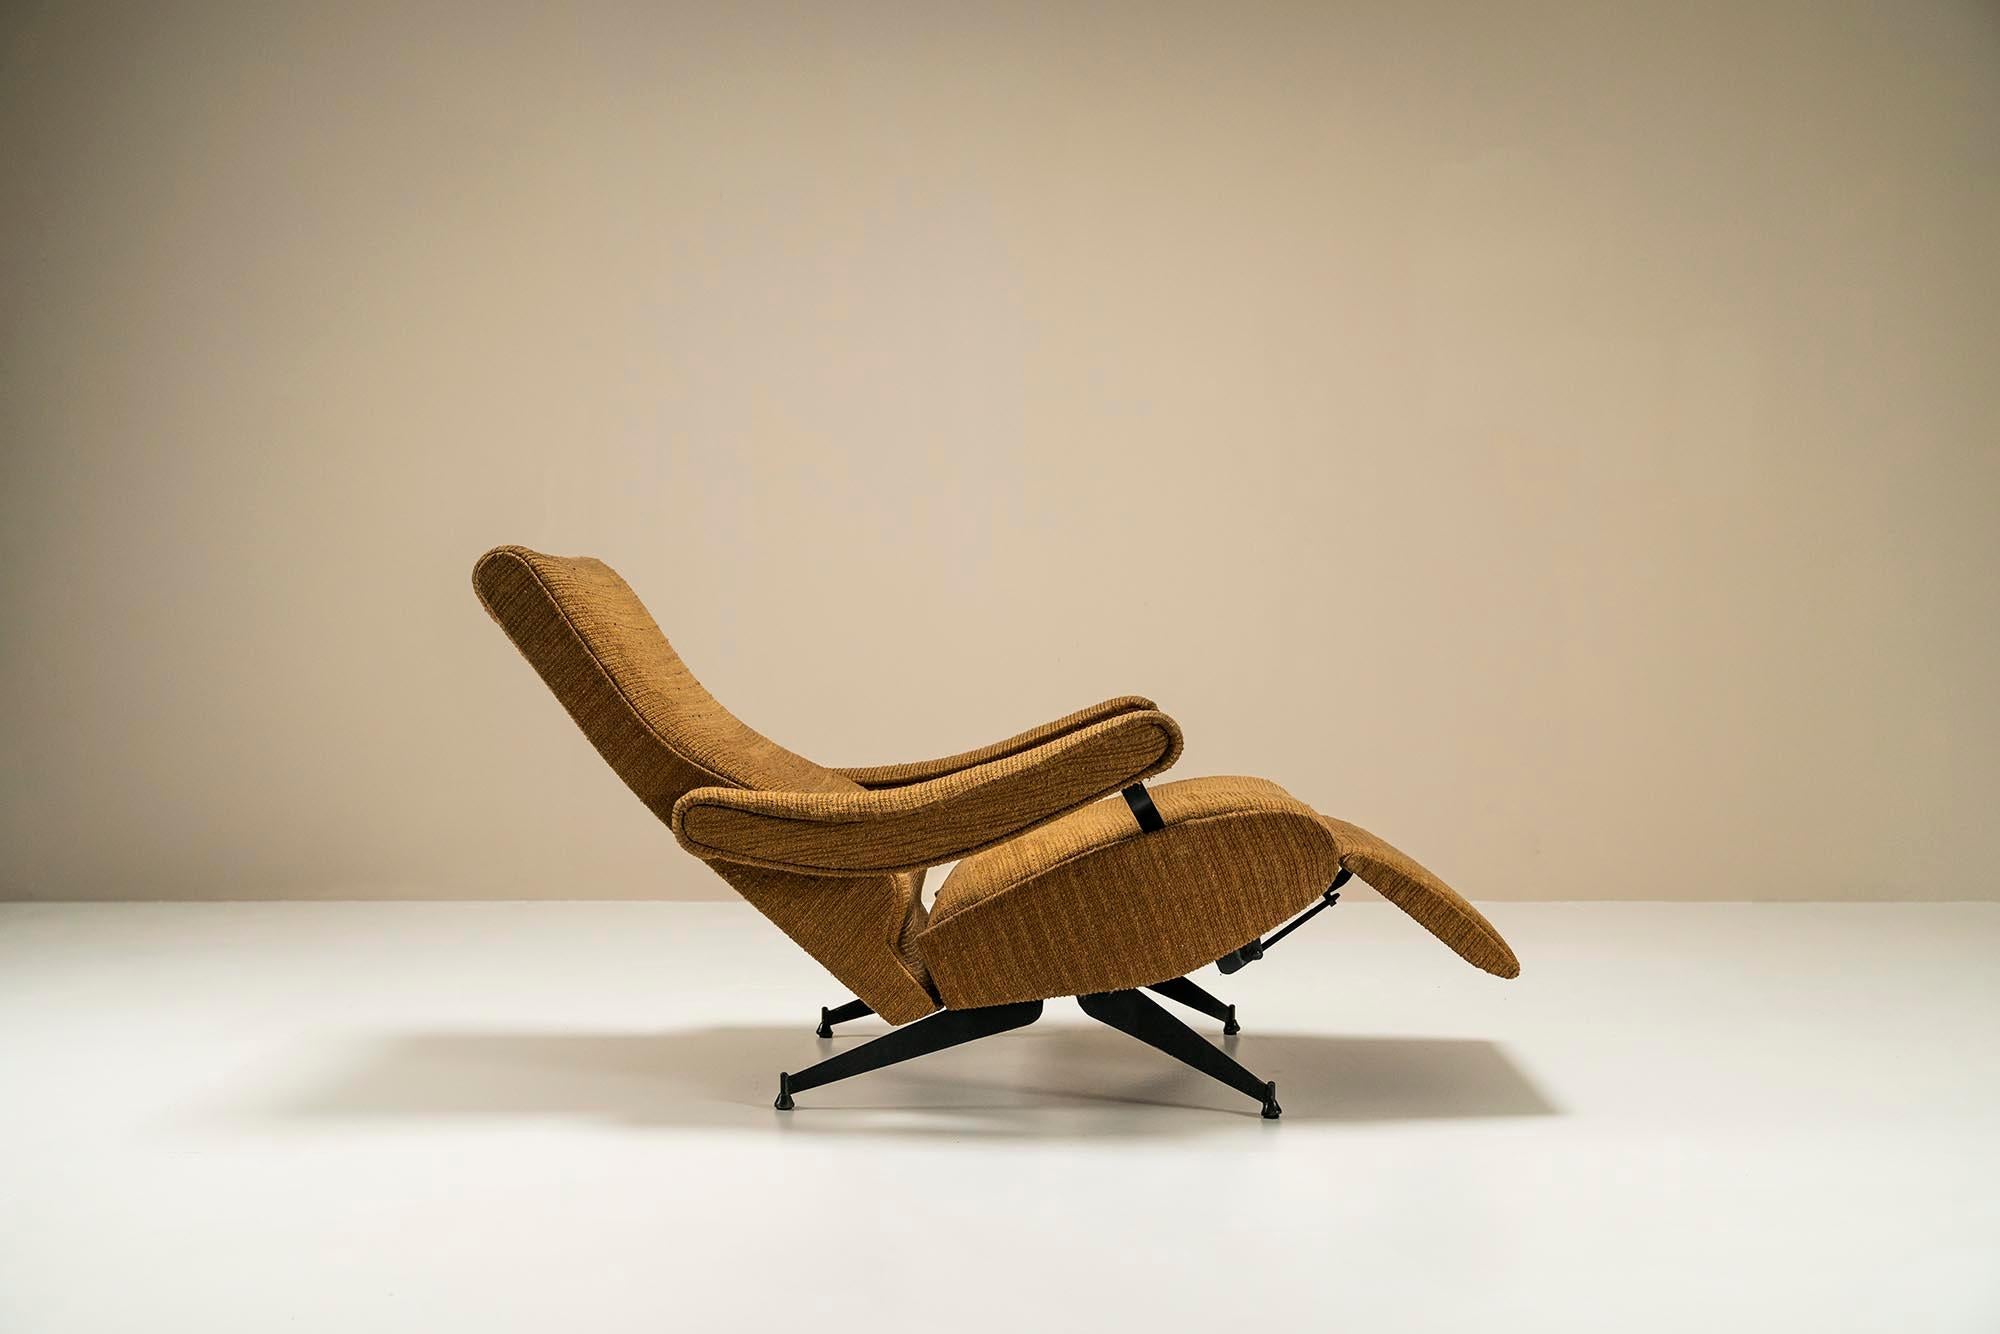 Reclining Armchair in Steel and Fabric by Nello Pini for Novarredo, Italy, 1959 For Sale 3